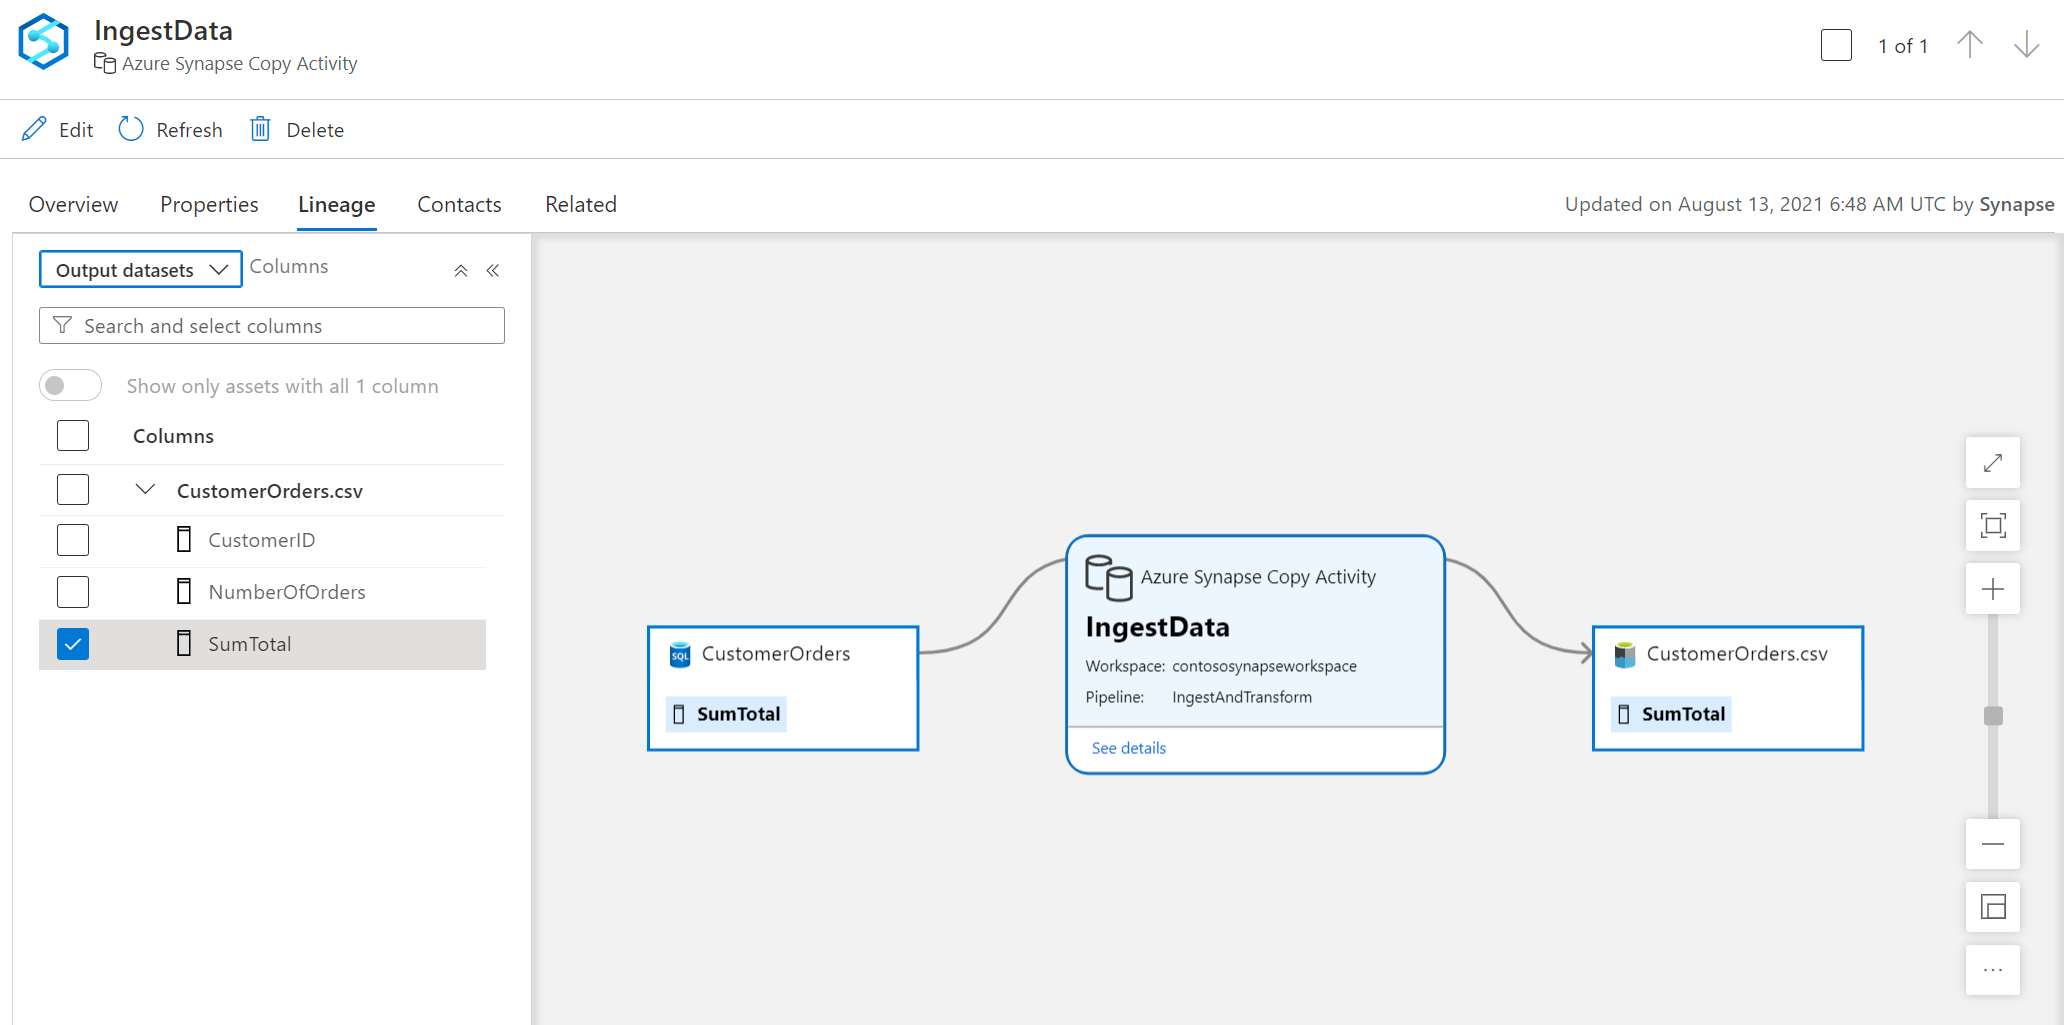 Browse the Azure Synapse pipeline lineage in Microsoft Purview.